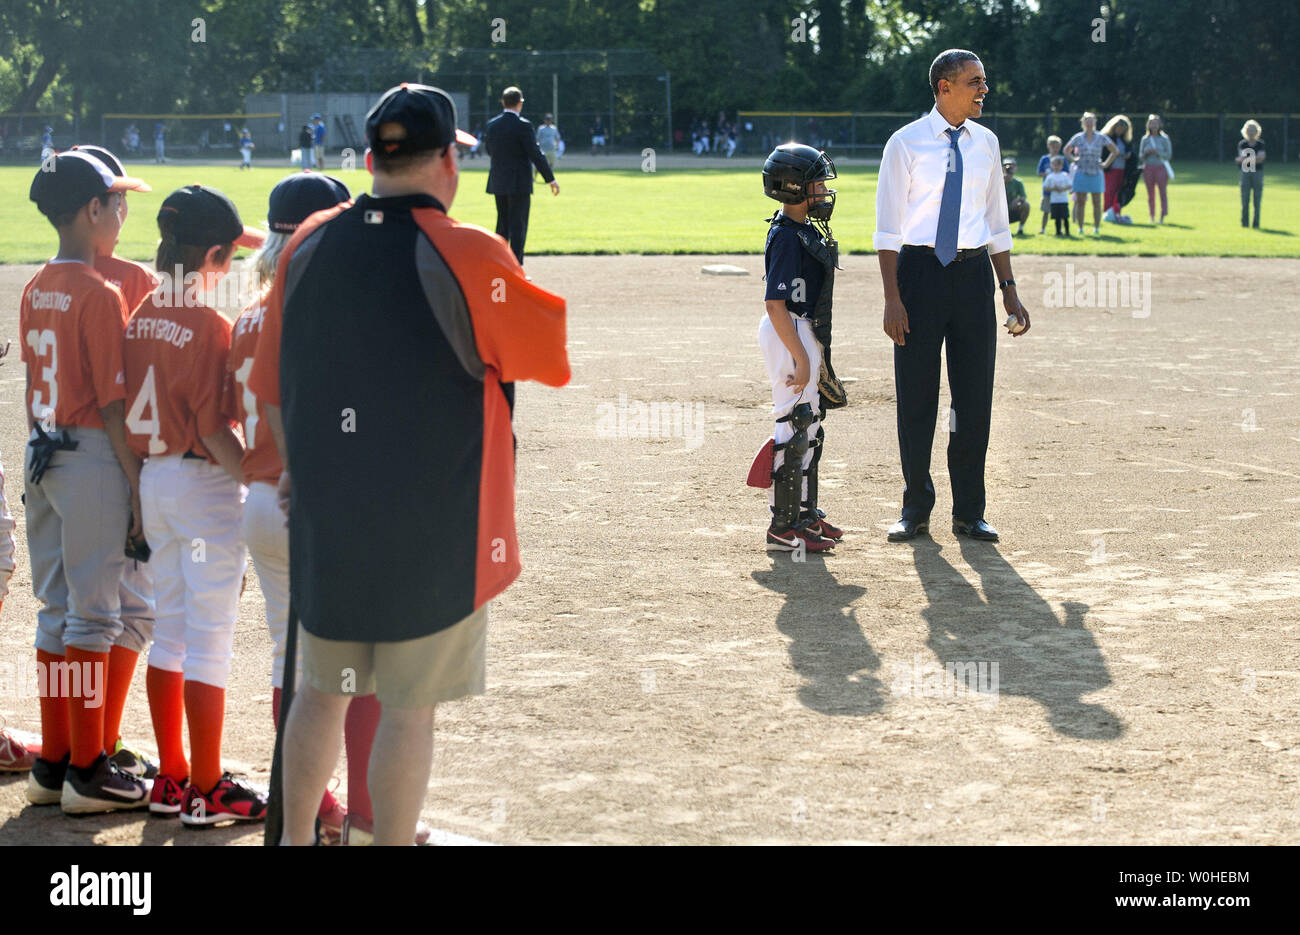 Obama Showed Up At My Little League Game